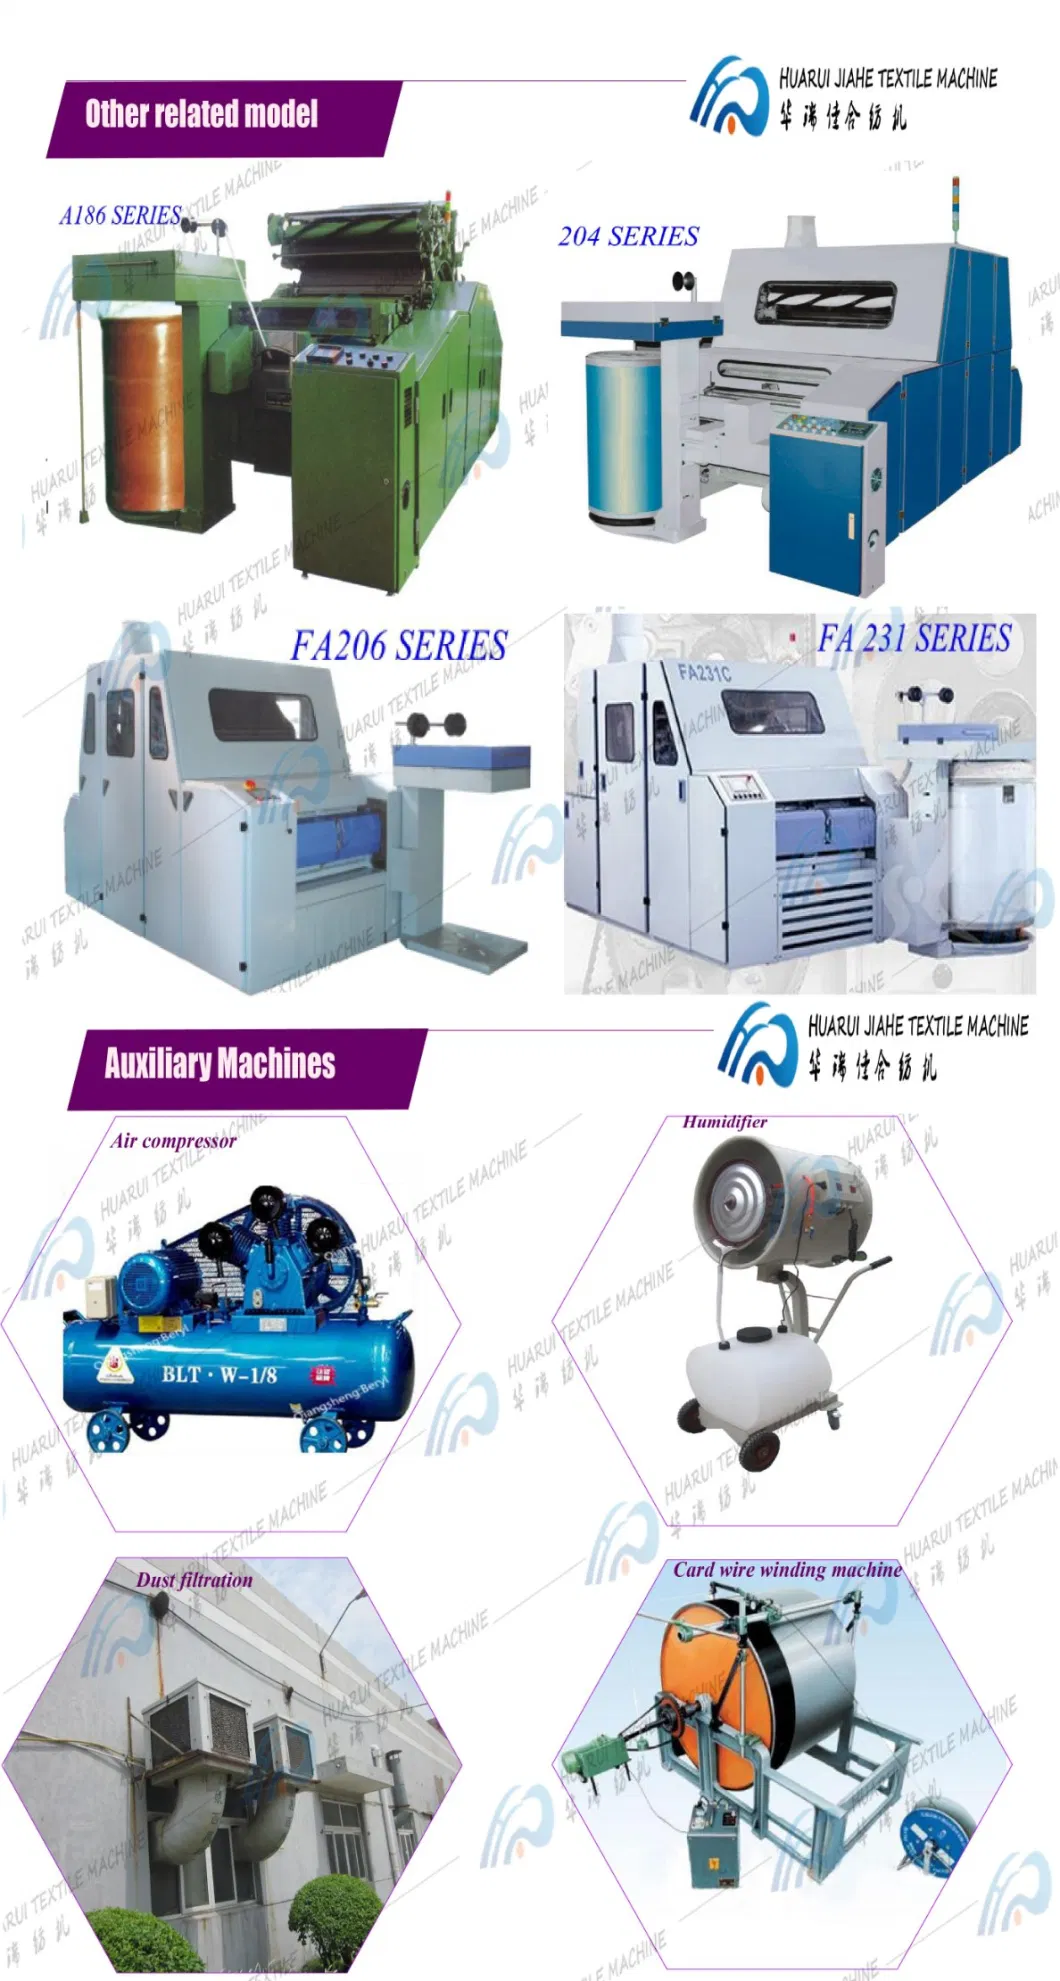 Fully Automated Textile Fabrics Beam Rolling Dye Machine Specially Used for Printing and Dyeing Desizing, Dyeing, Washing, Bleaching